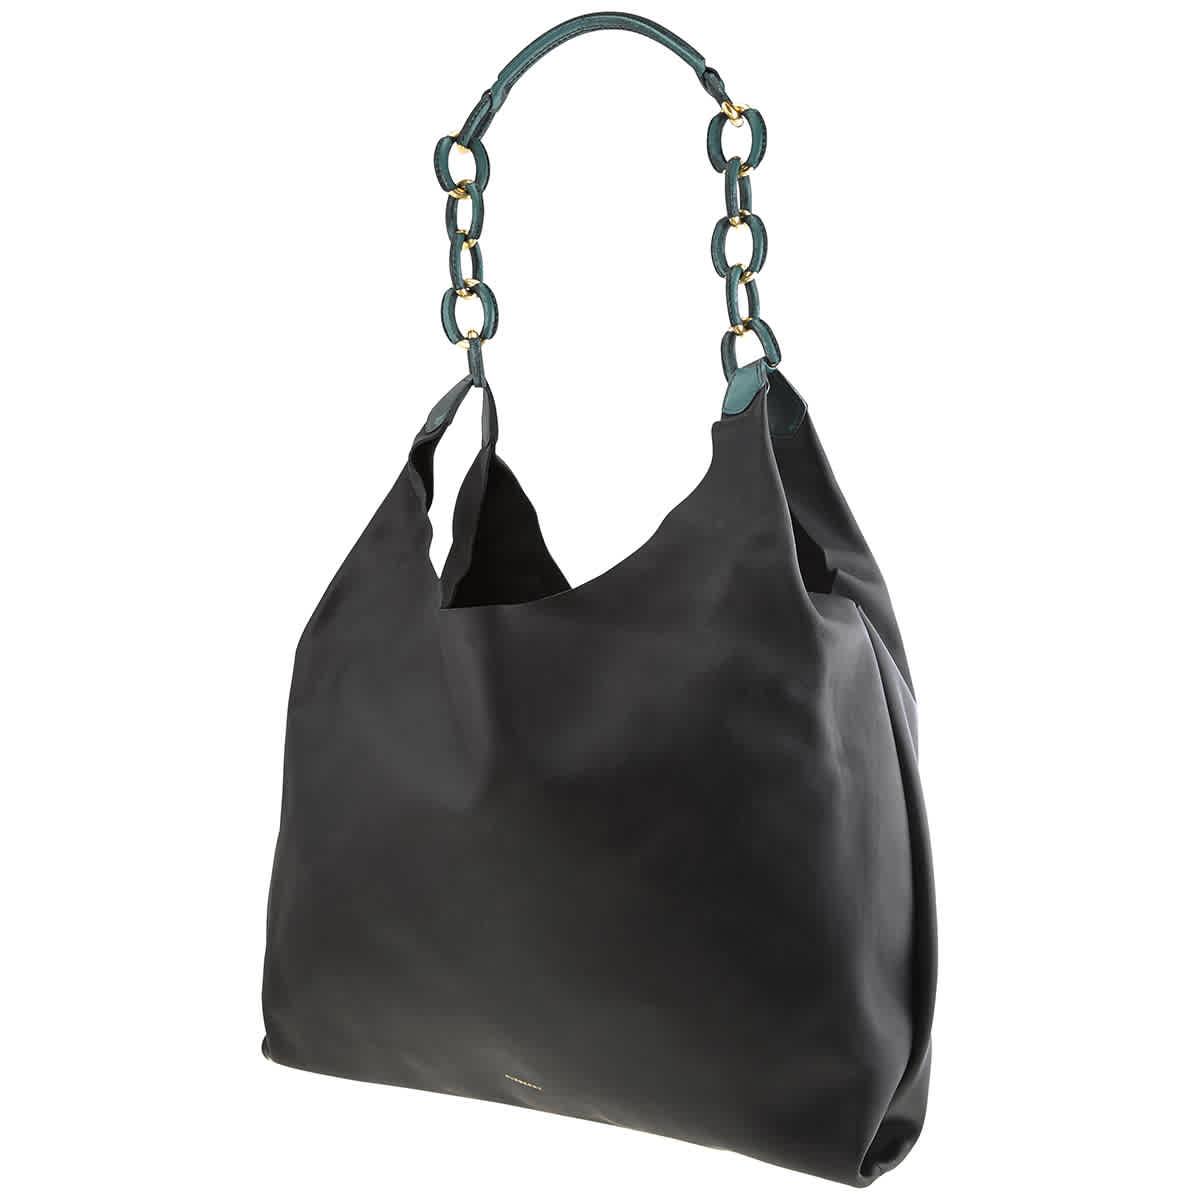 Burberry Medium Two Tone Leather Shopper Tote in Black | Lyst